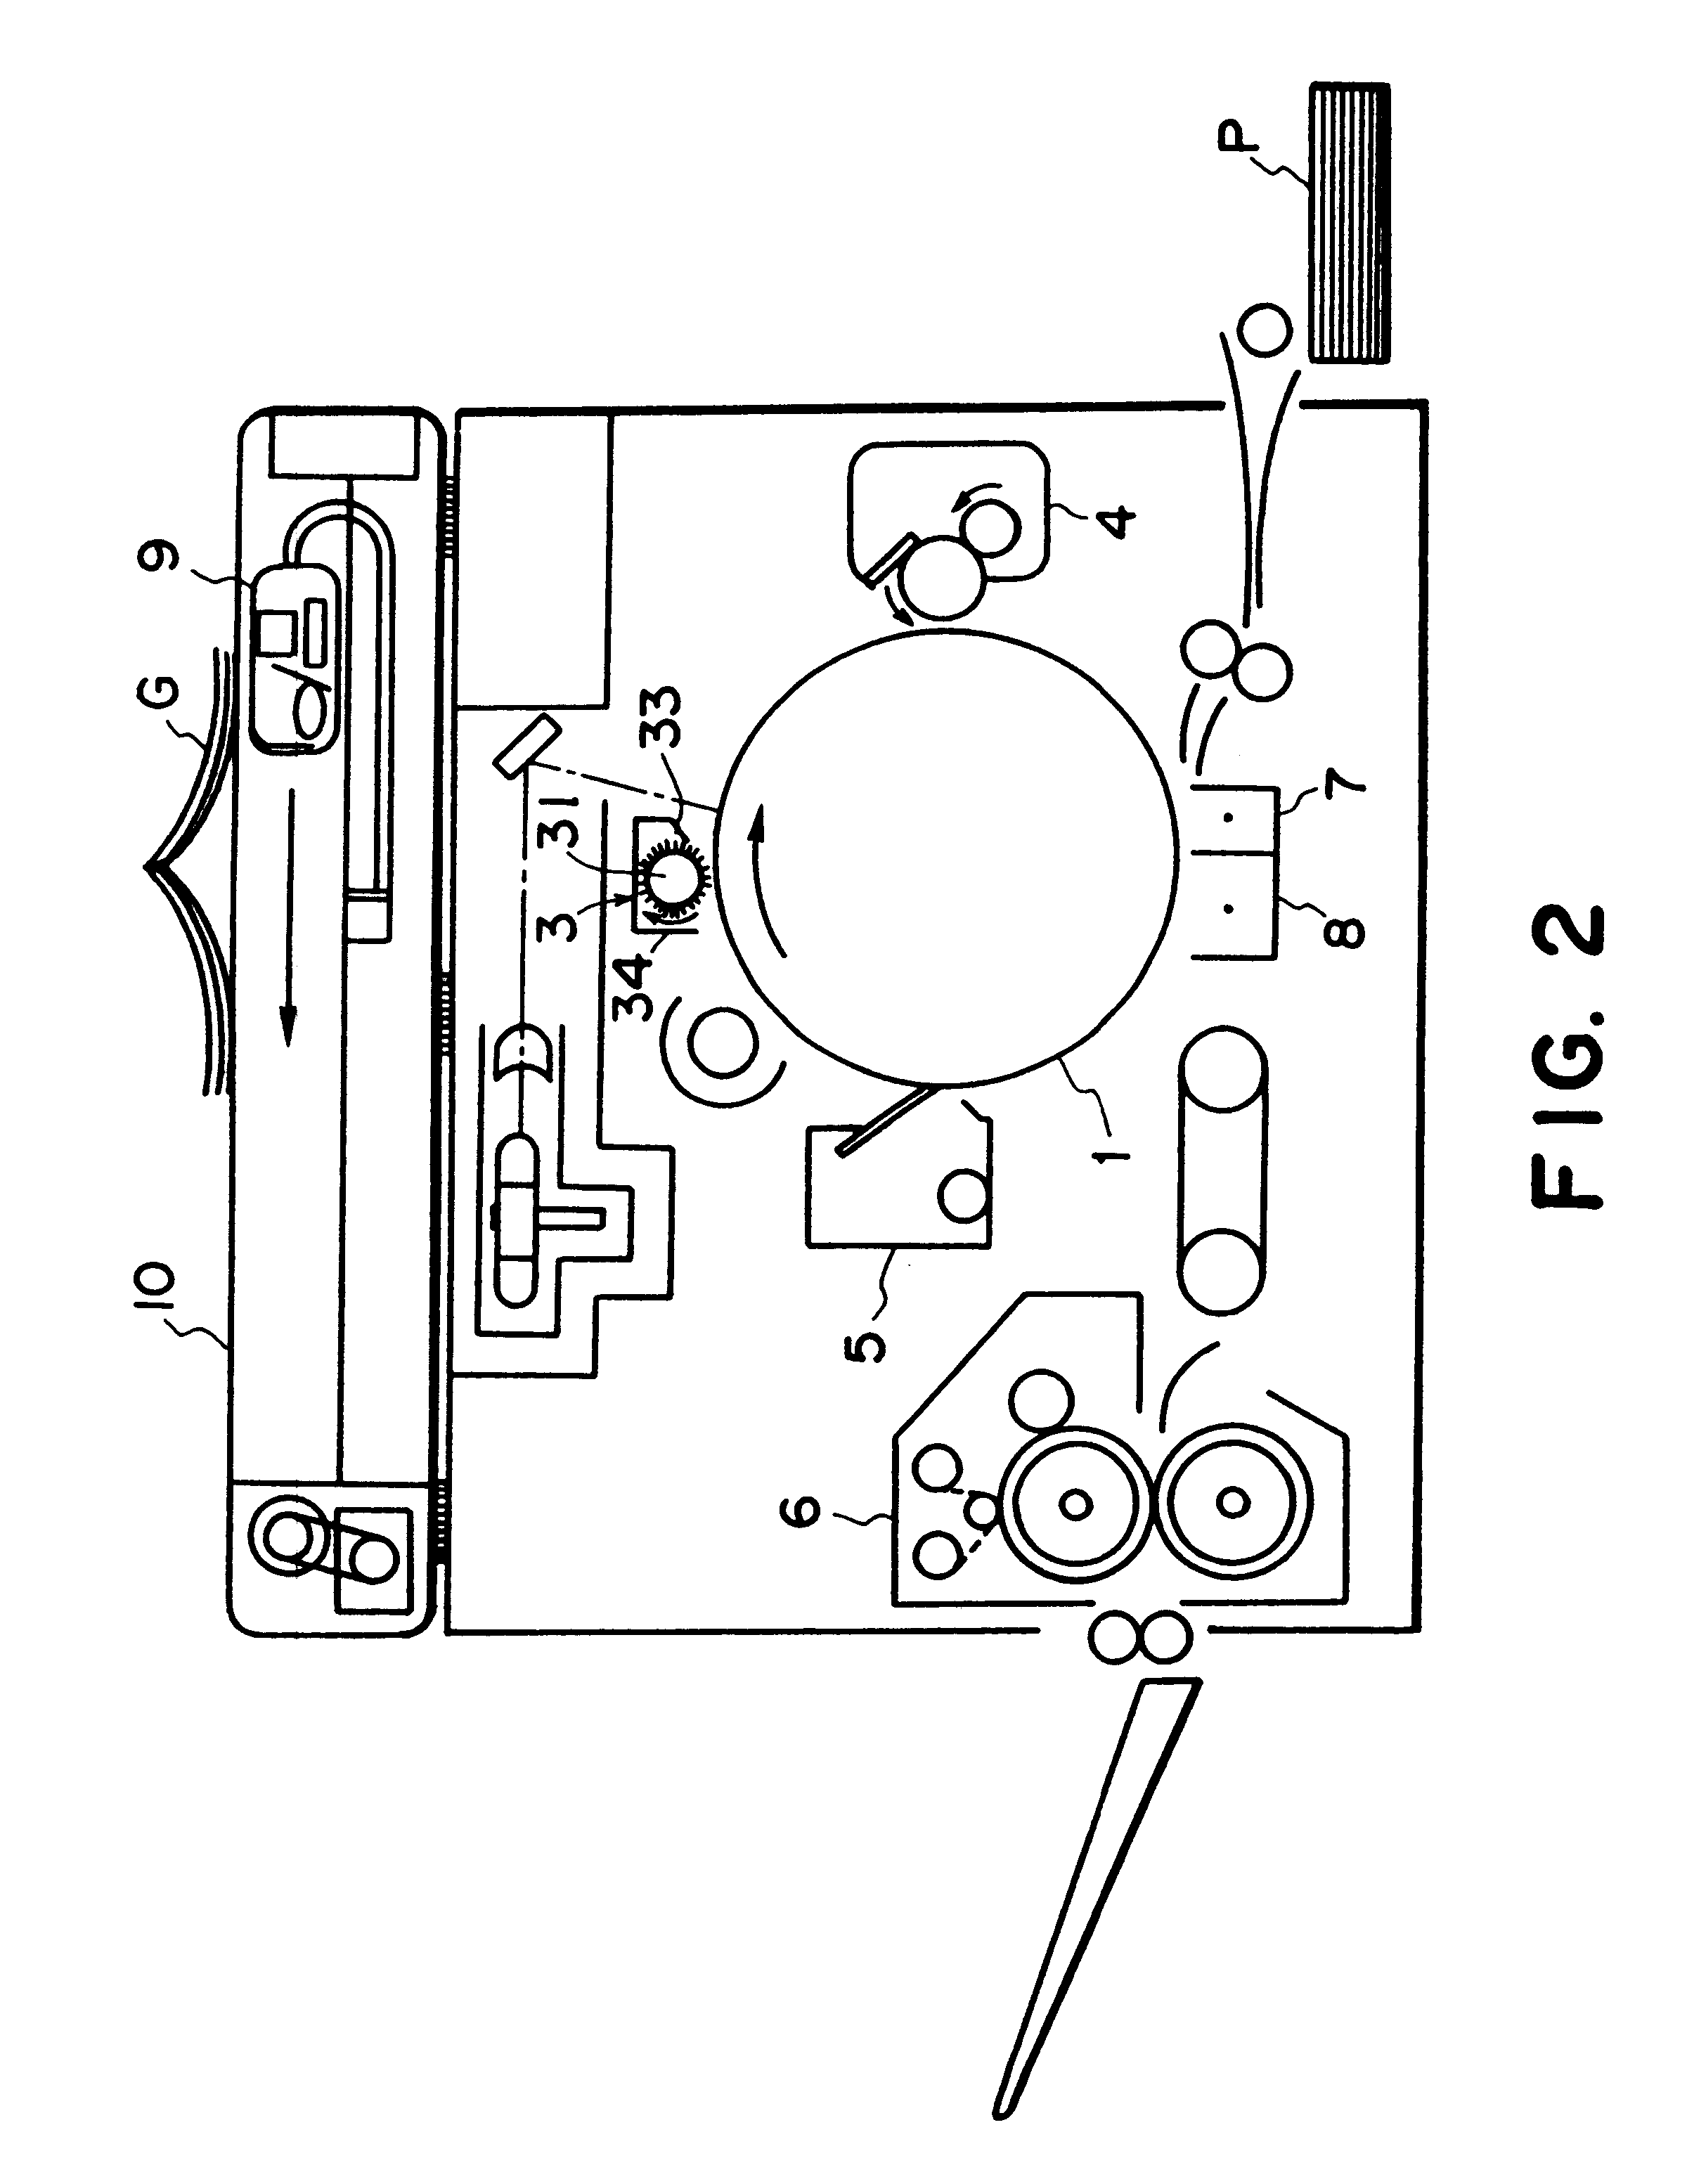 Image forming apparatus having an injection charging system and a two component contact development device